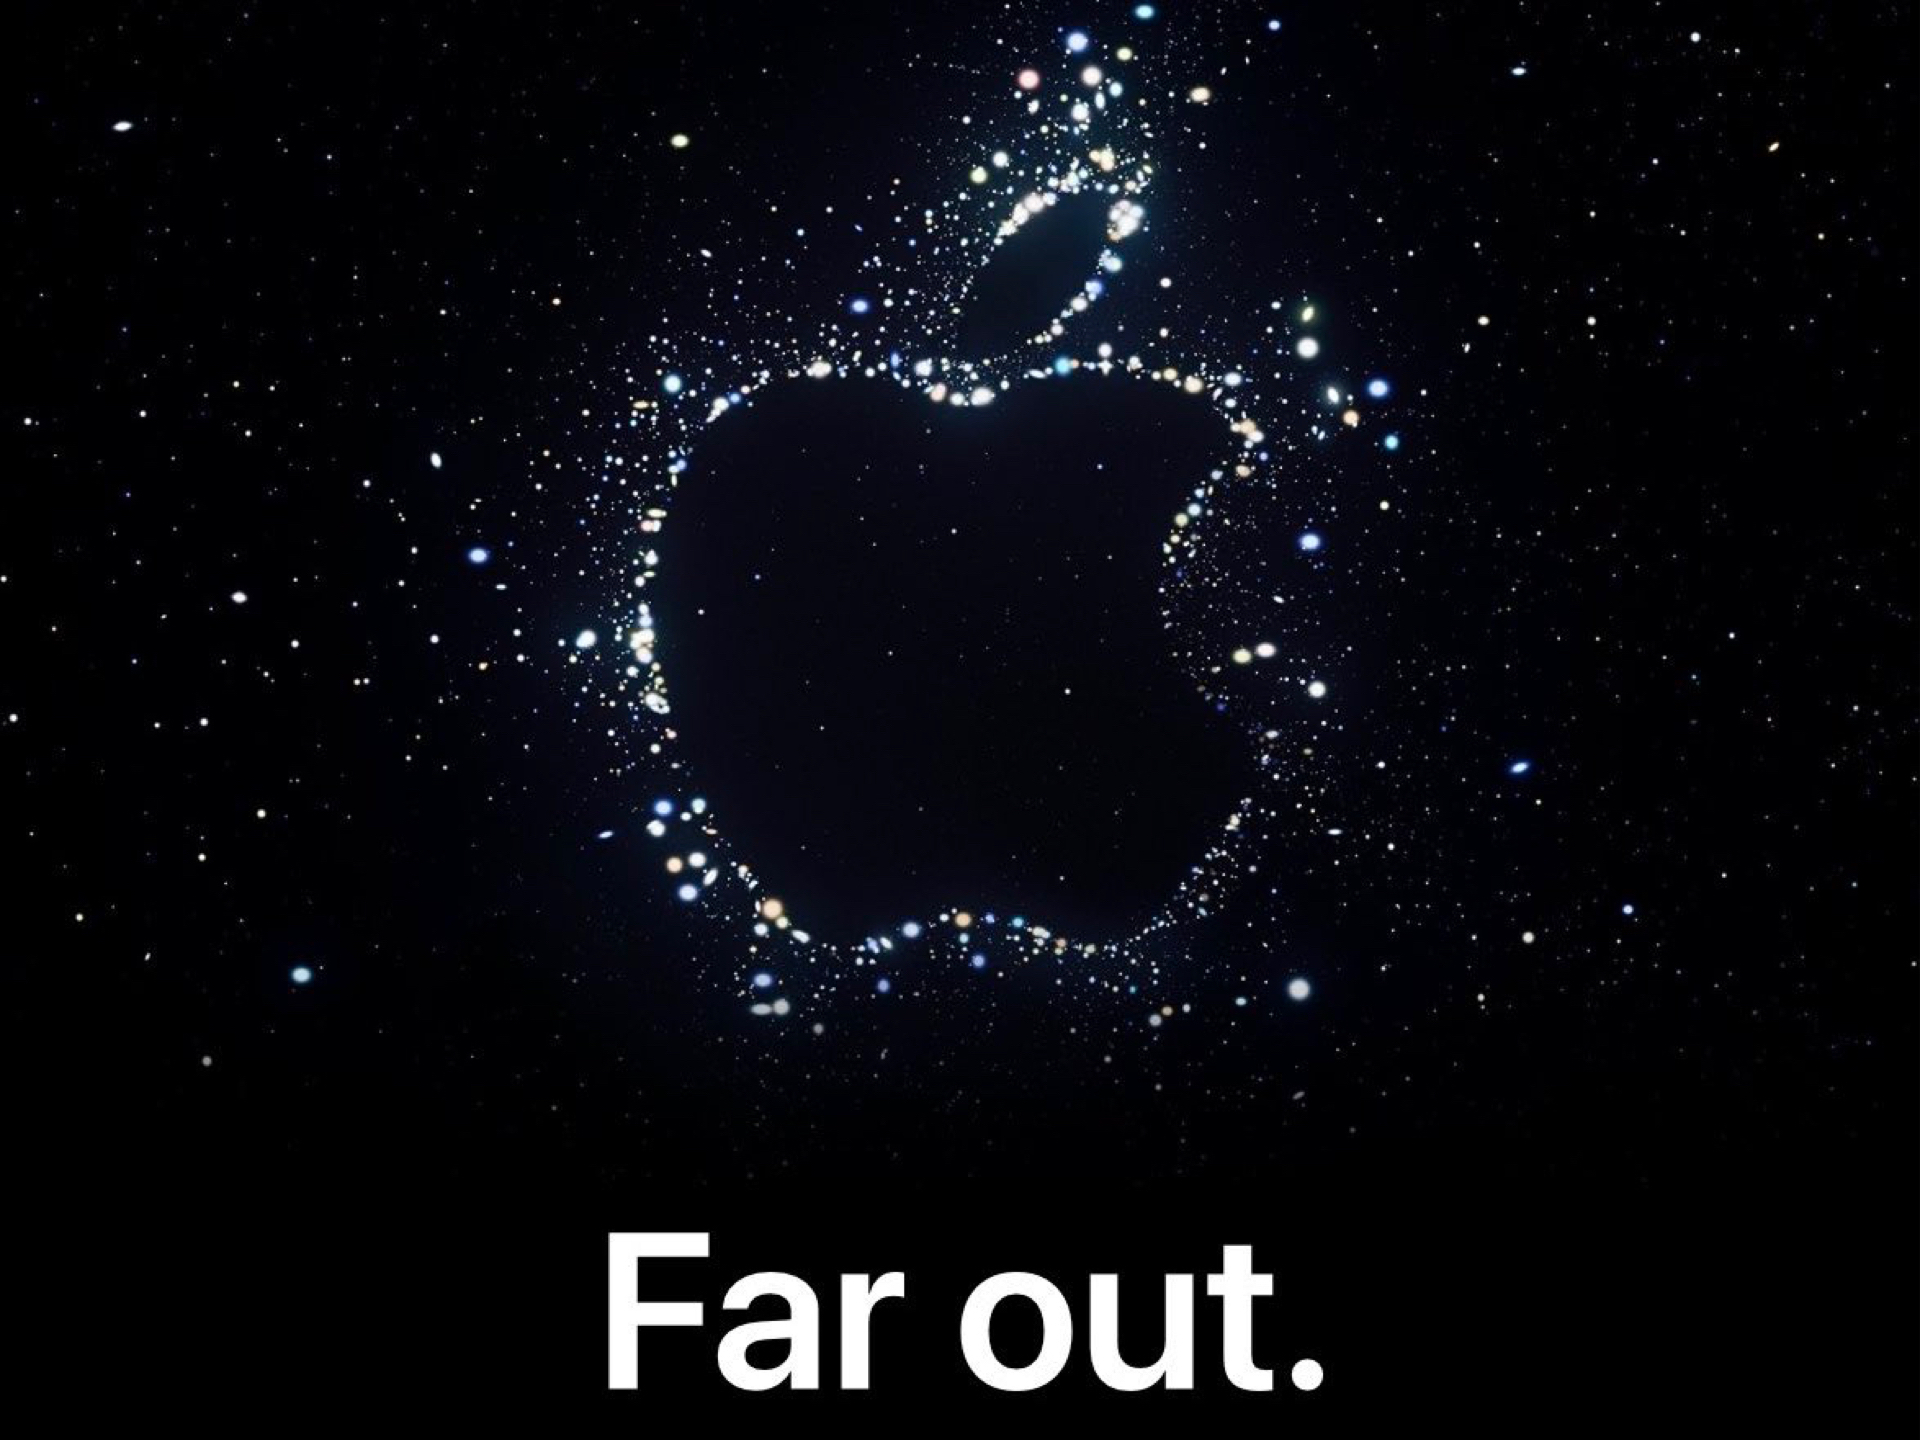 Apple Event iPhone 14 Event September 7 Far Out